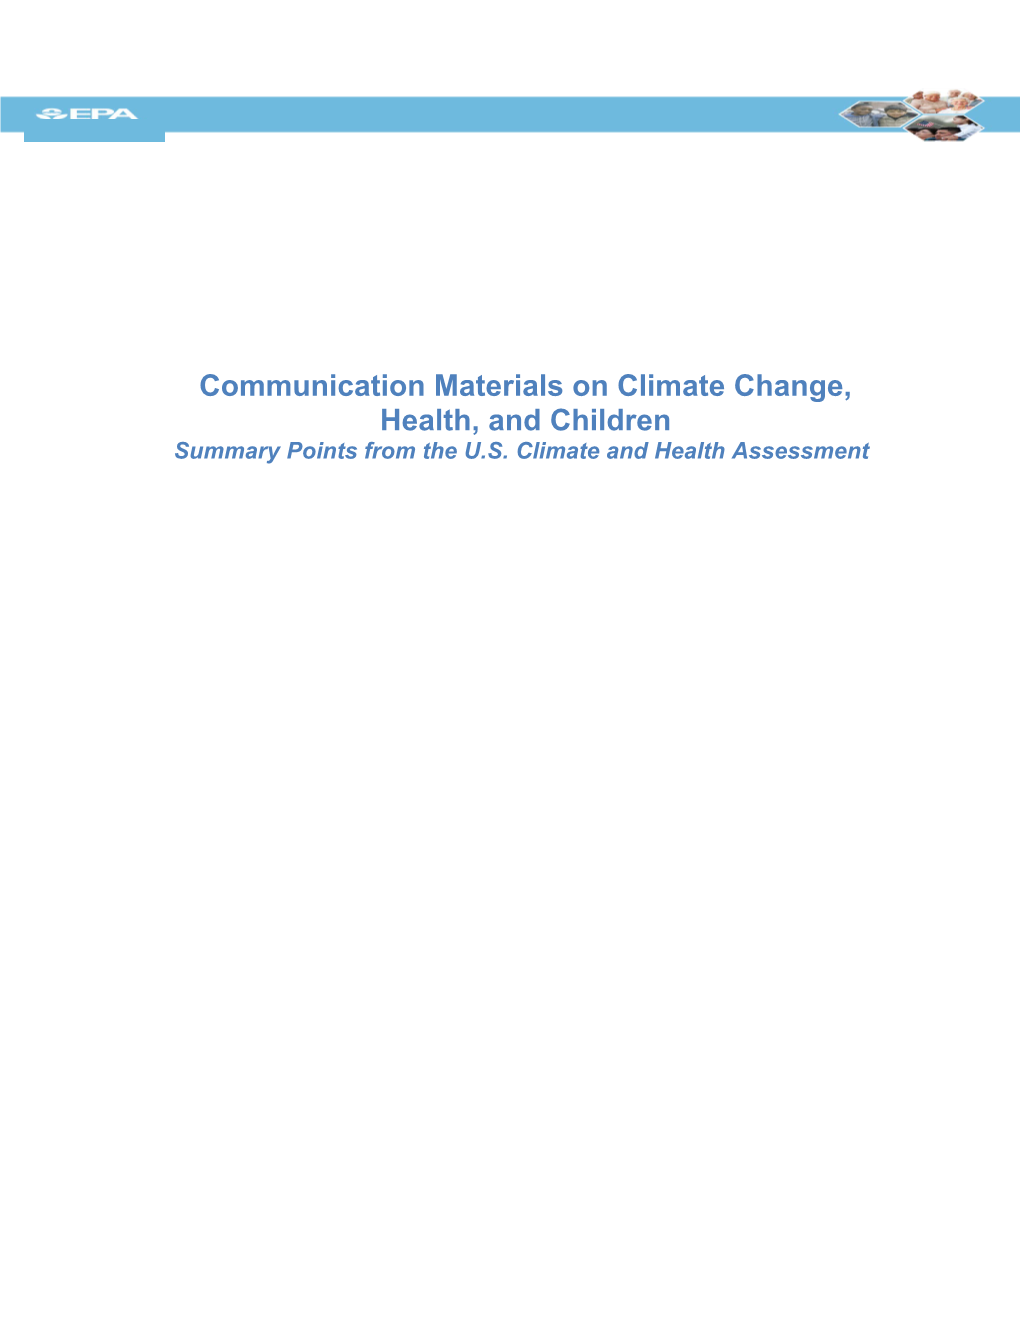 Communication Materials on Climate Change, Health, and Children